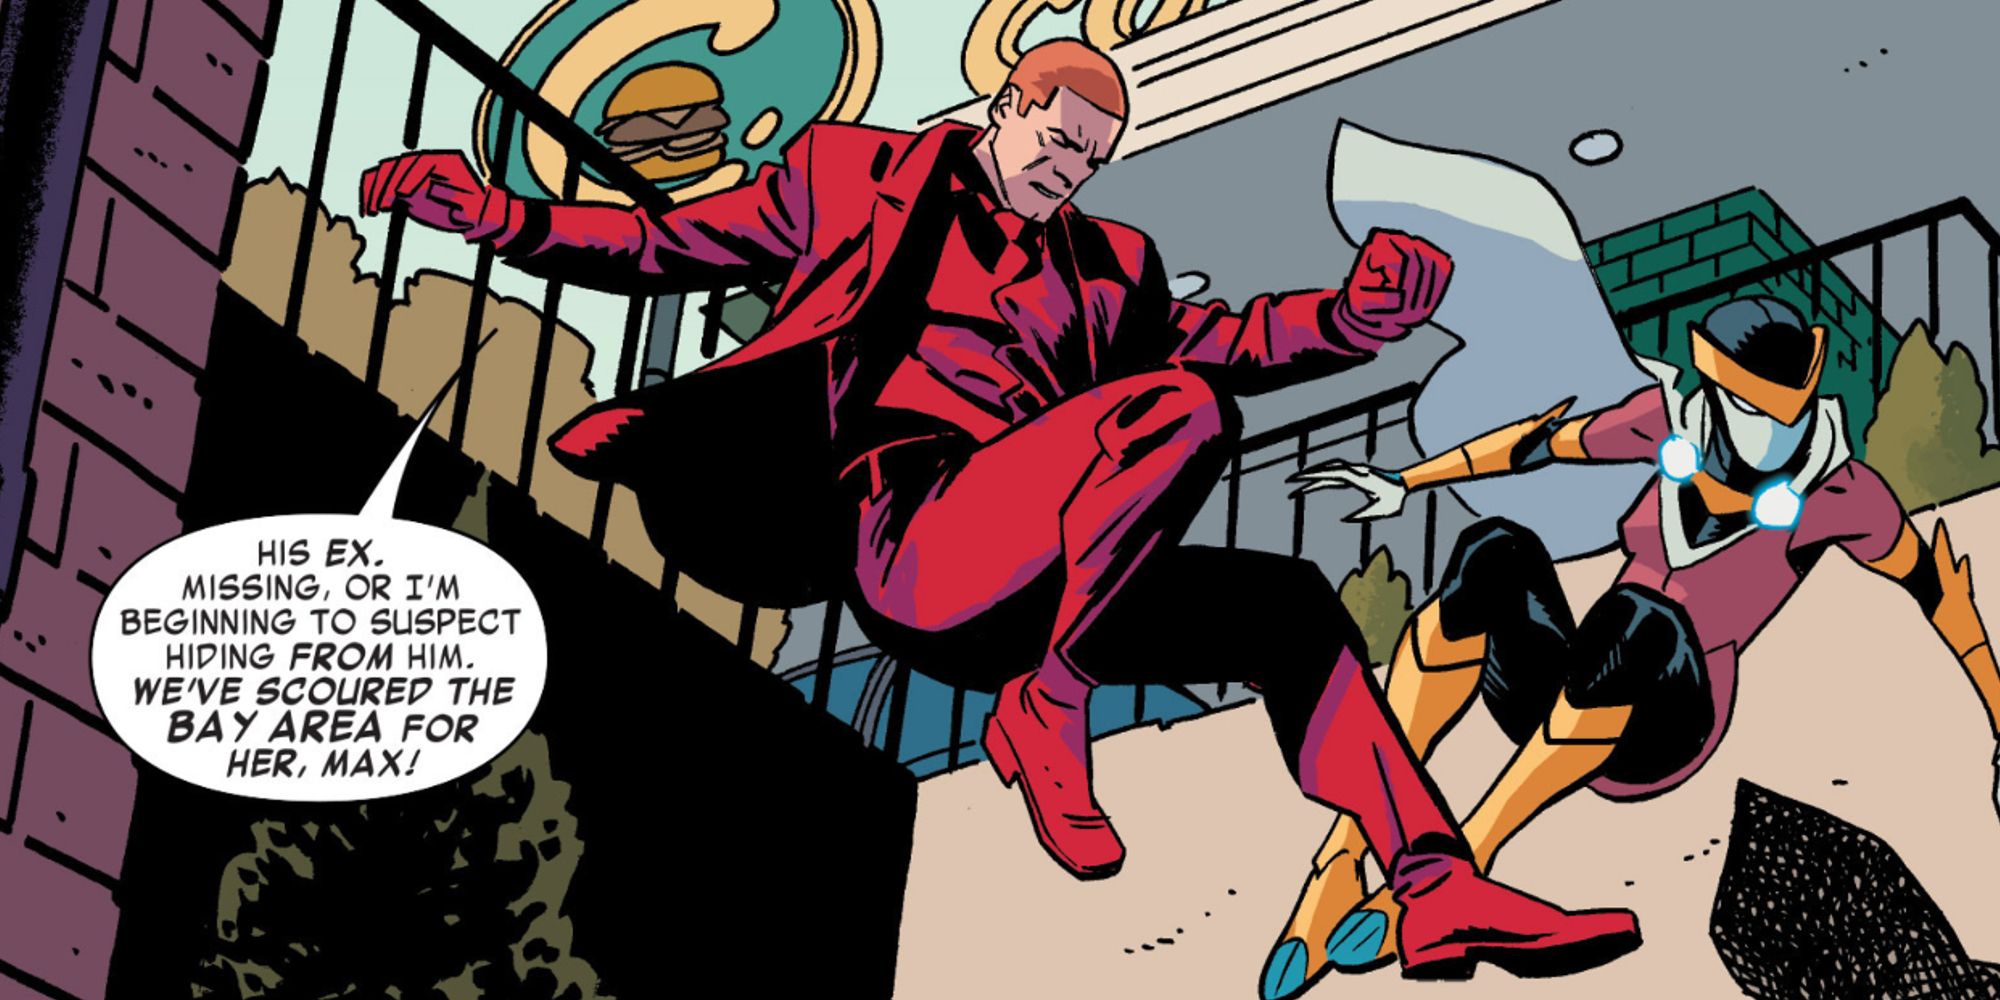 Daredevil leaping into action in his Attorney At Law suit